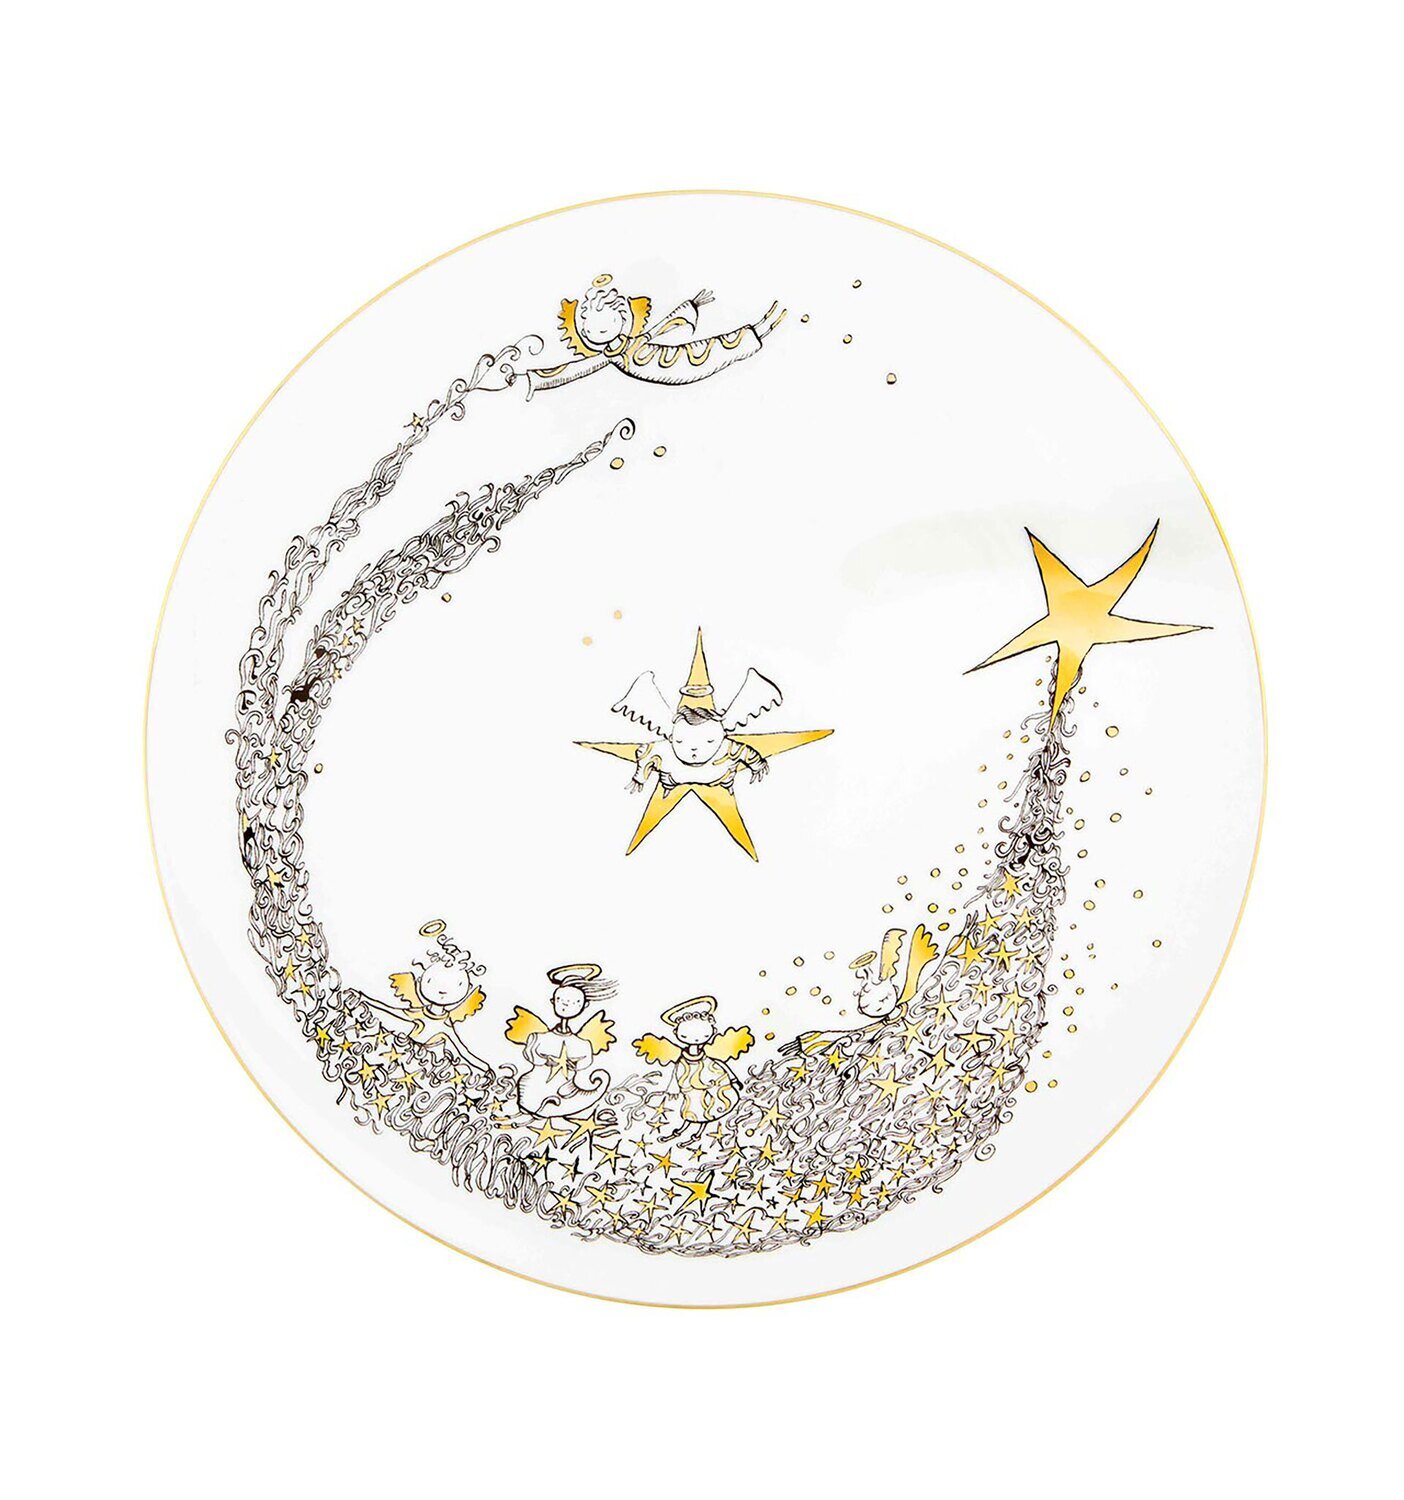 Vista Alegre Chasing Stars Charger Plate 21134948